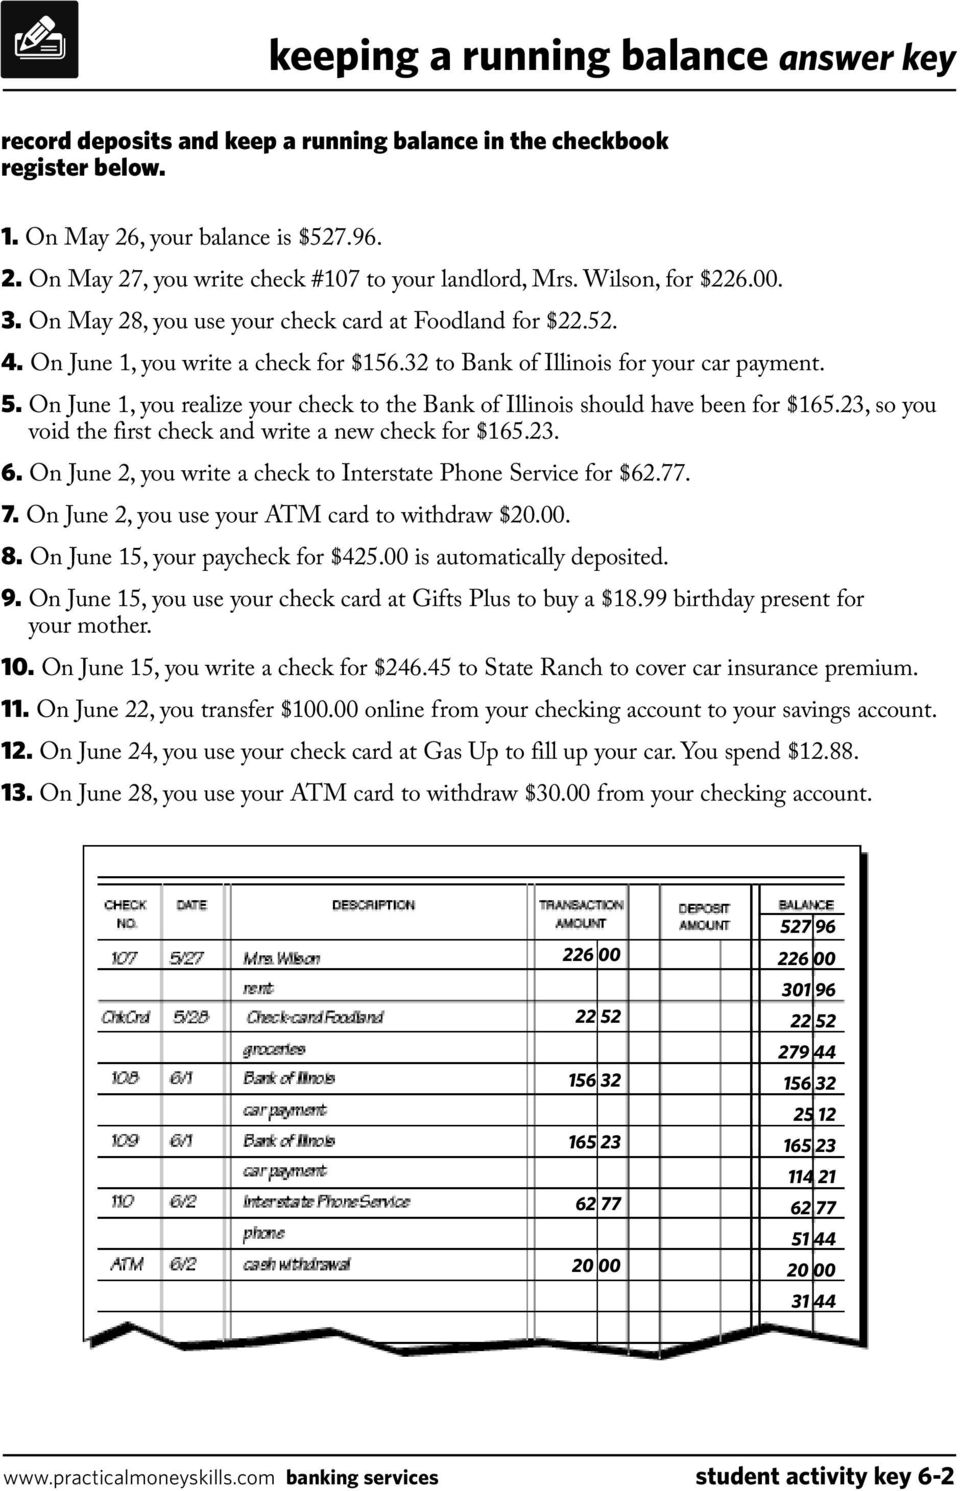 keeping a running balance answer key - PDF Free Download Within Checkbook Register Worksheet 1 Answers